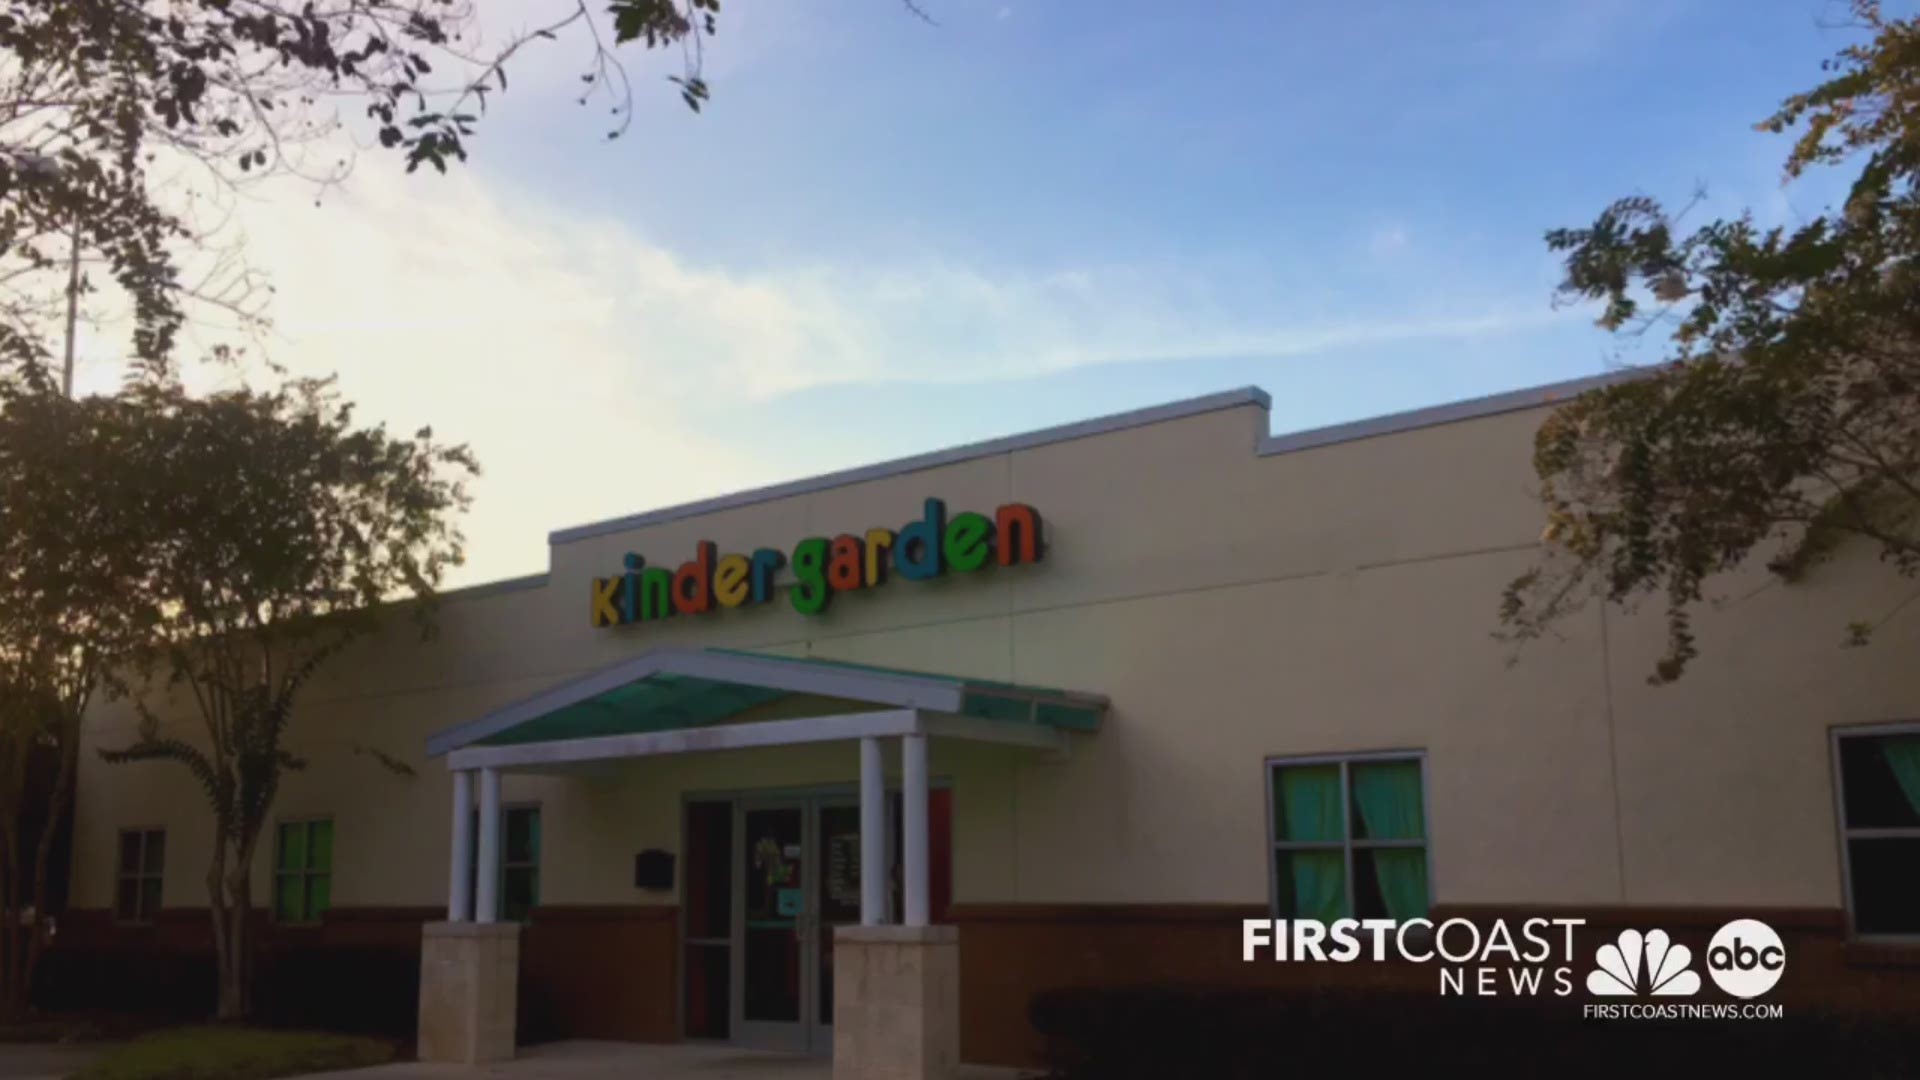 An employee at Kinder Garden daycare in Jacksonville says she does not recall ever seeing Taylor Williams, despite her being in the daycare's database.